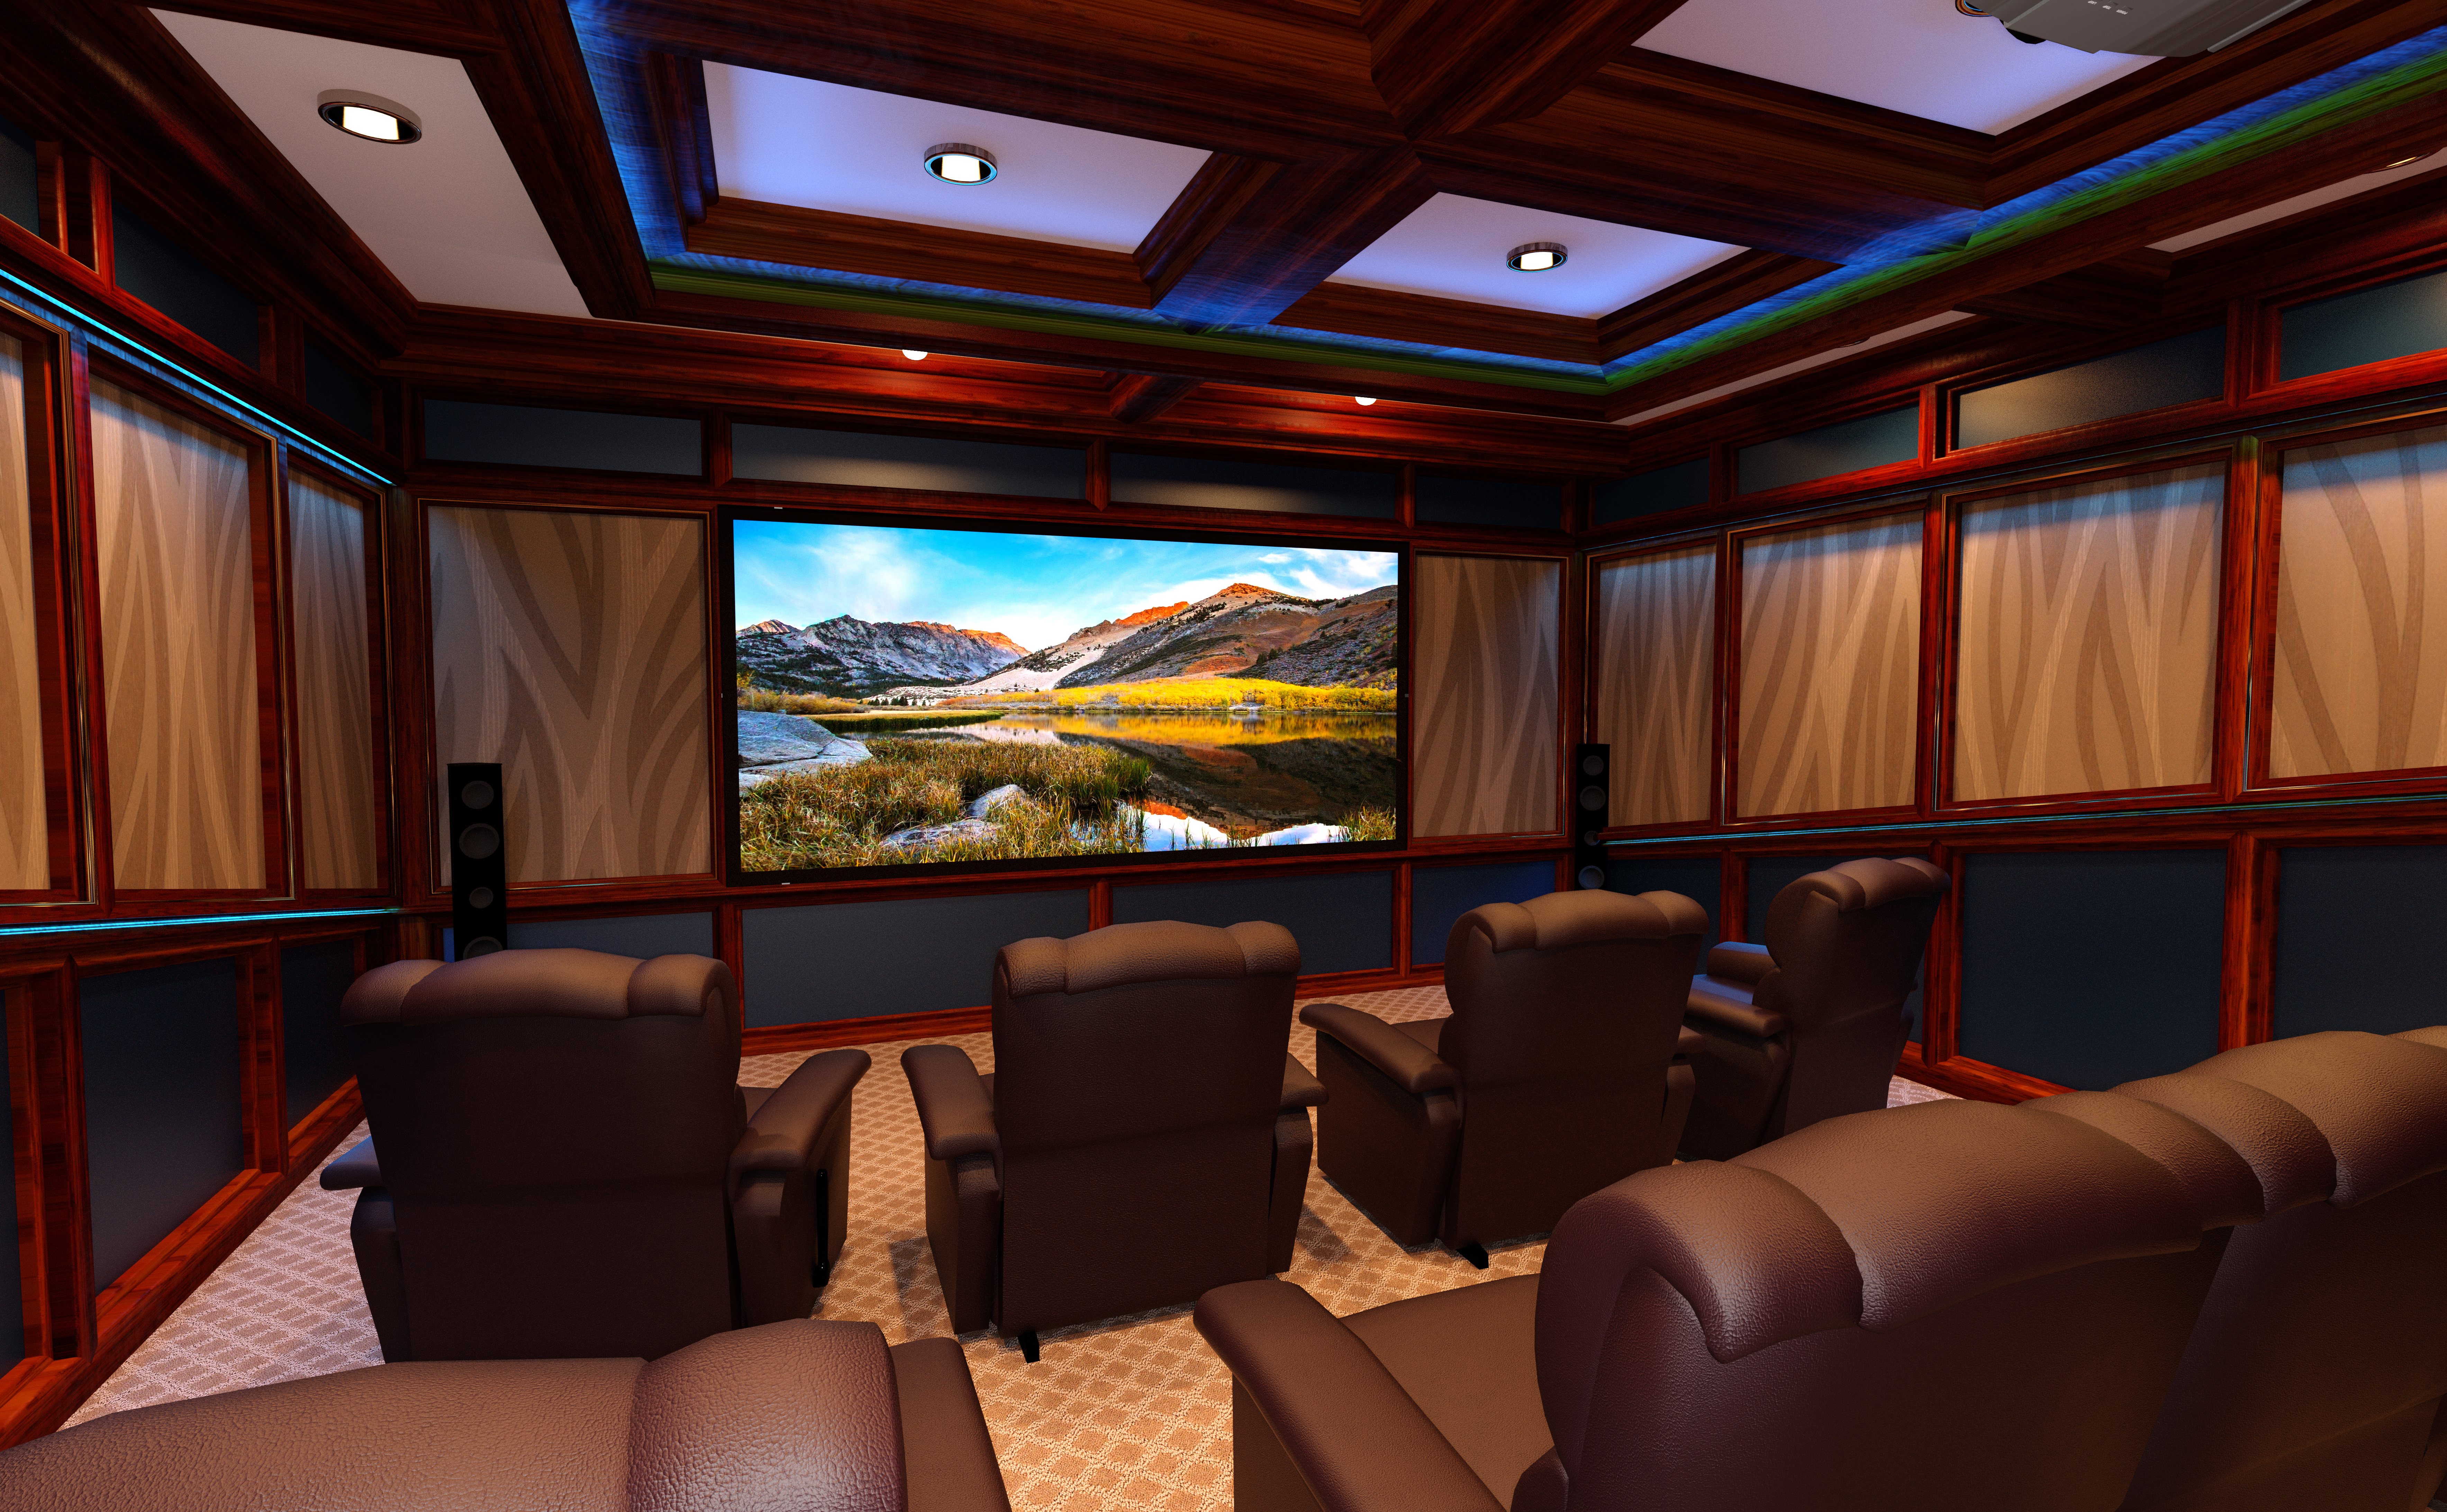 Home theater with video playing on screen